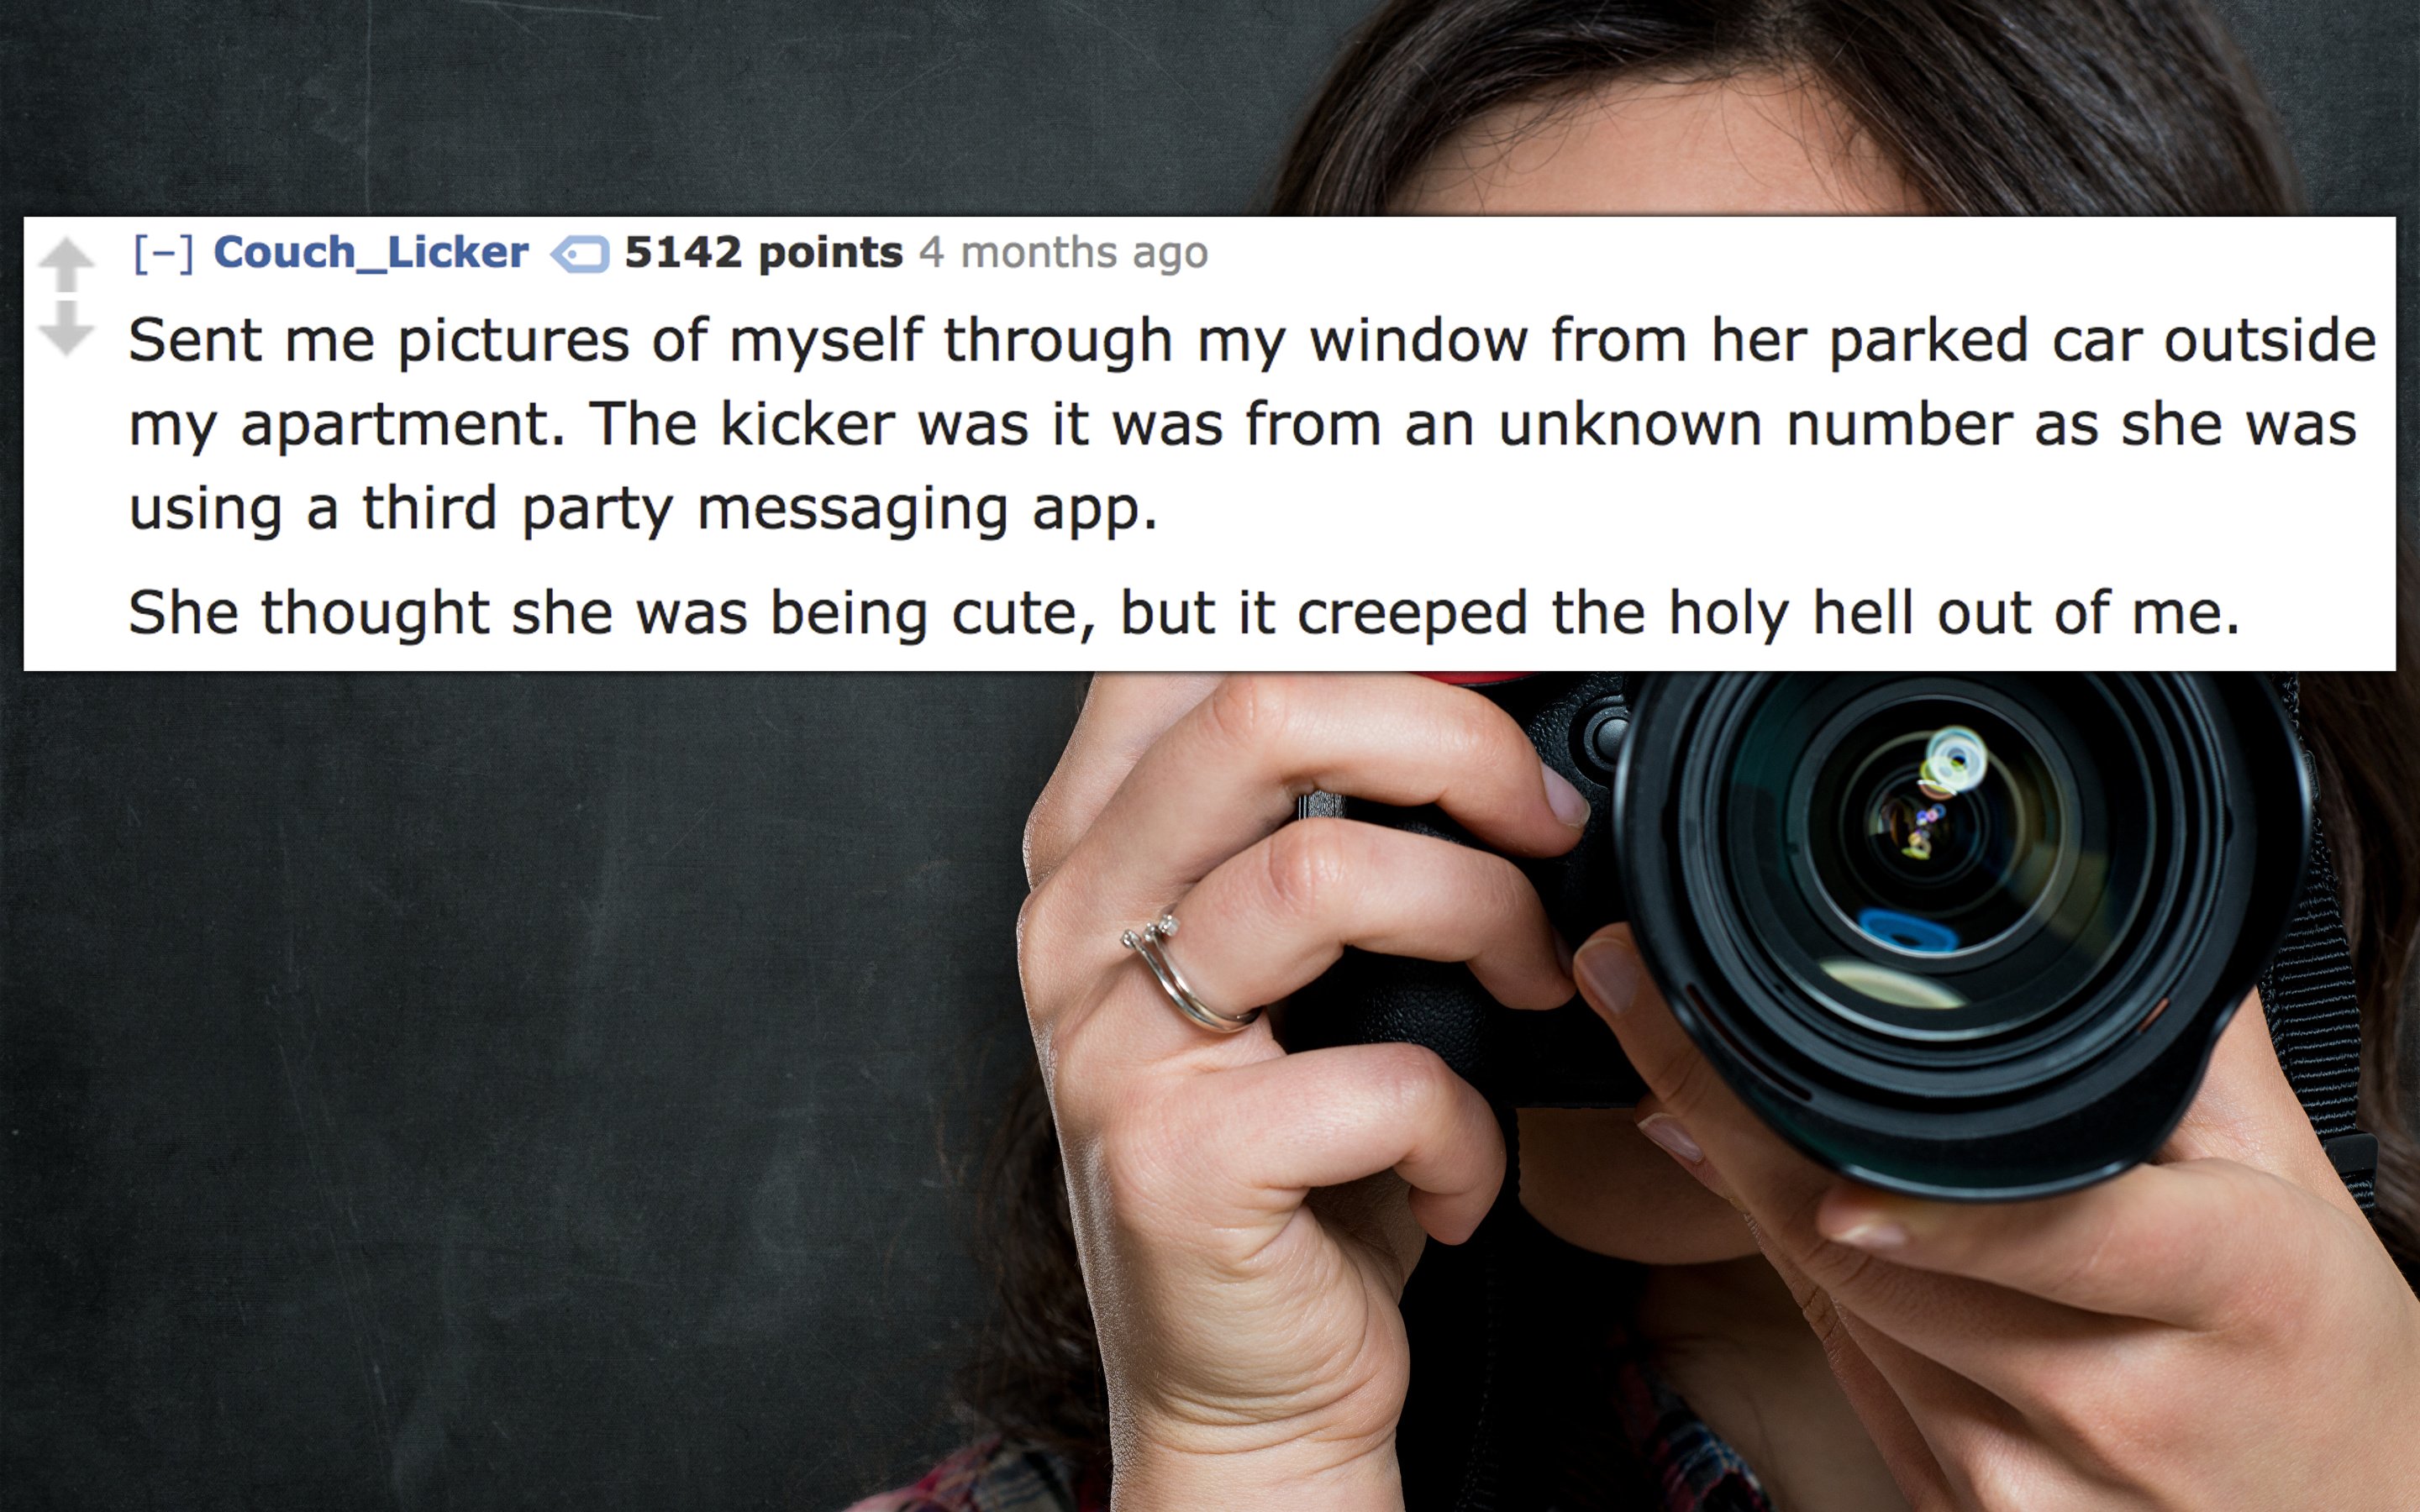 Photography - Couch_Licker 5142 points 4 months ago Sent me pictures of myself through my window from her parked car outside my apartment. The kicker was it was from an unknown number as she was using a third party messaging app. She thought she was being